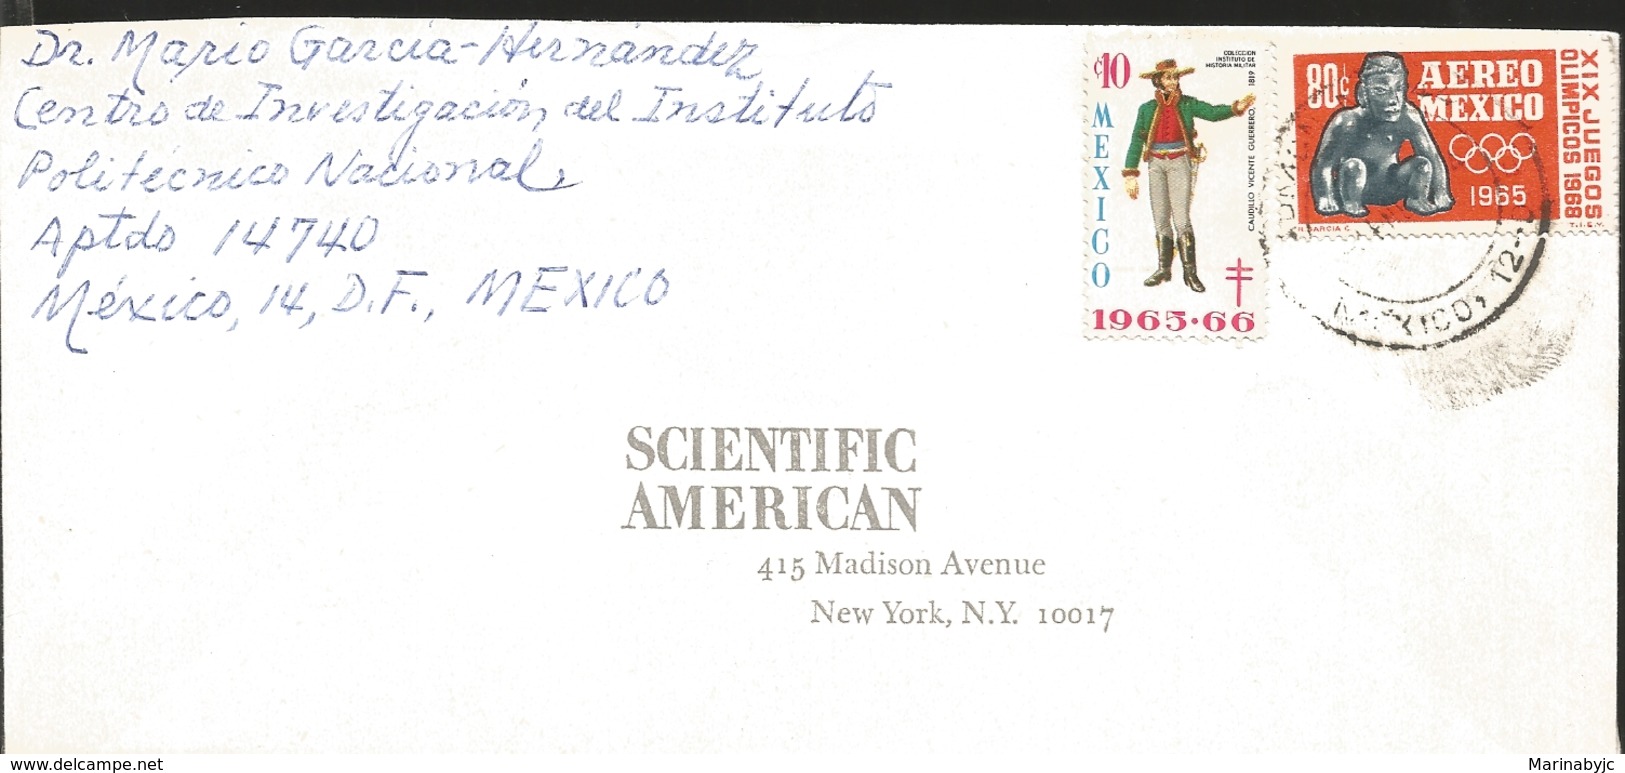 J) 1965 MEXICO, XIX OLYMPIC GAMES, TB SEALS, COLLECTION INSTITUTE OF MILITARY HISTORY, VICENTE GUERRERO, MULTIPLE STAMPS - Mexico